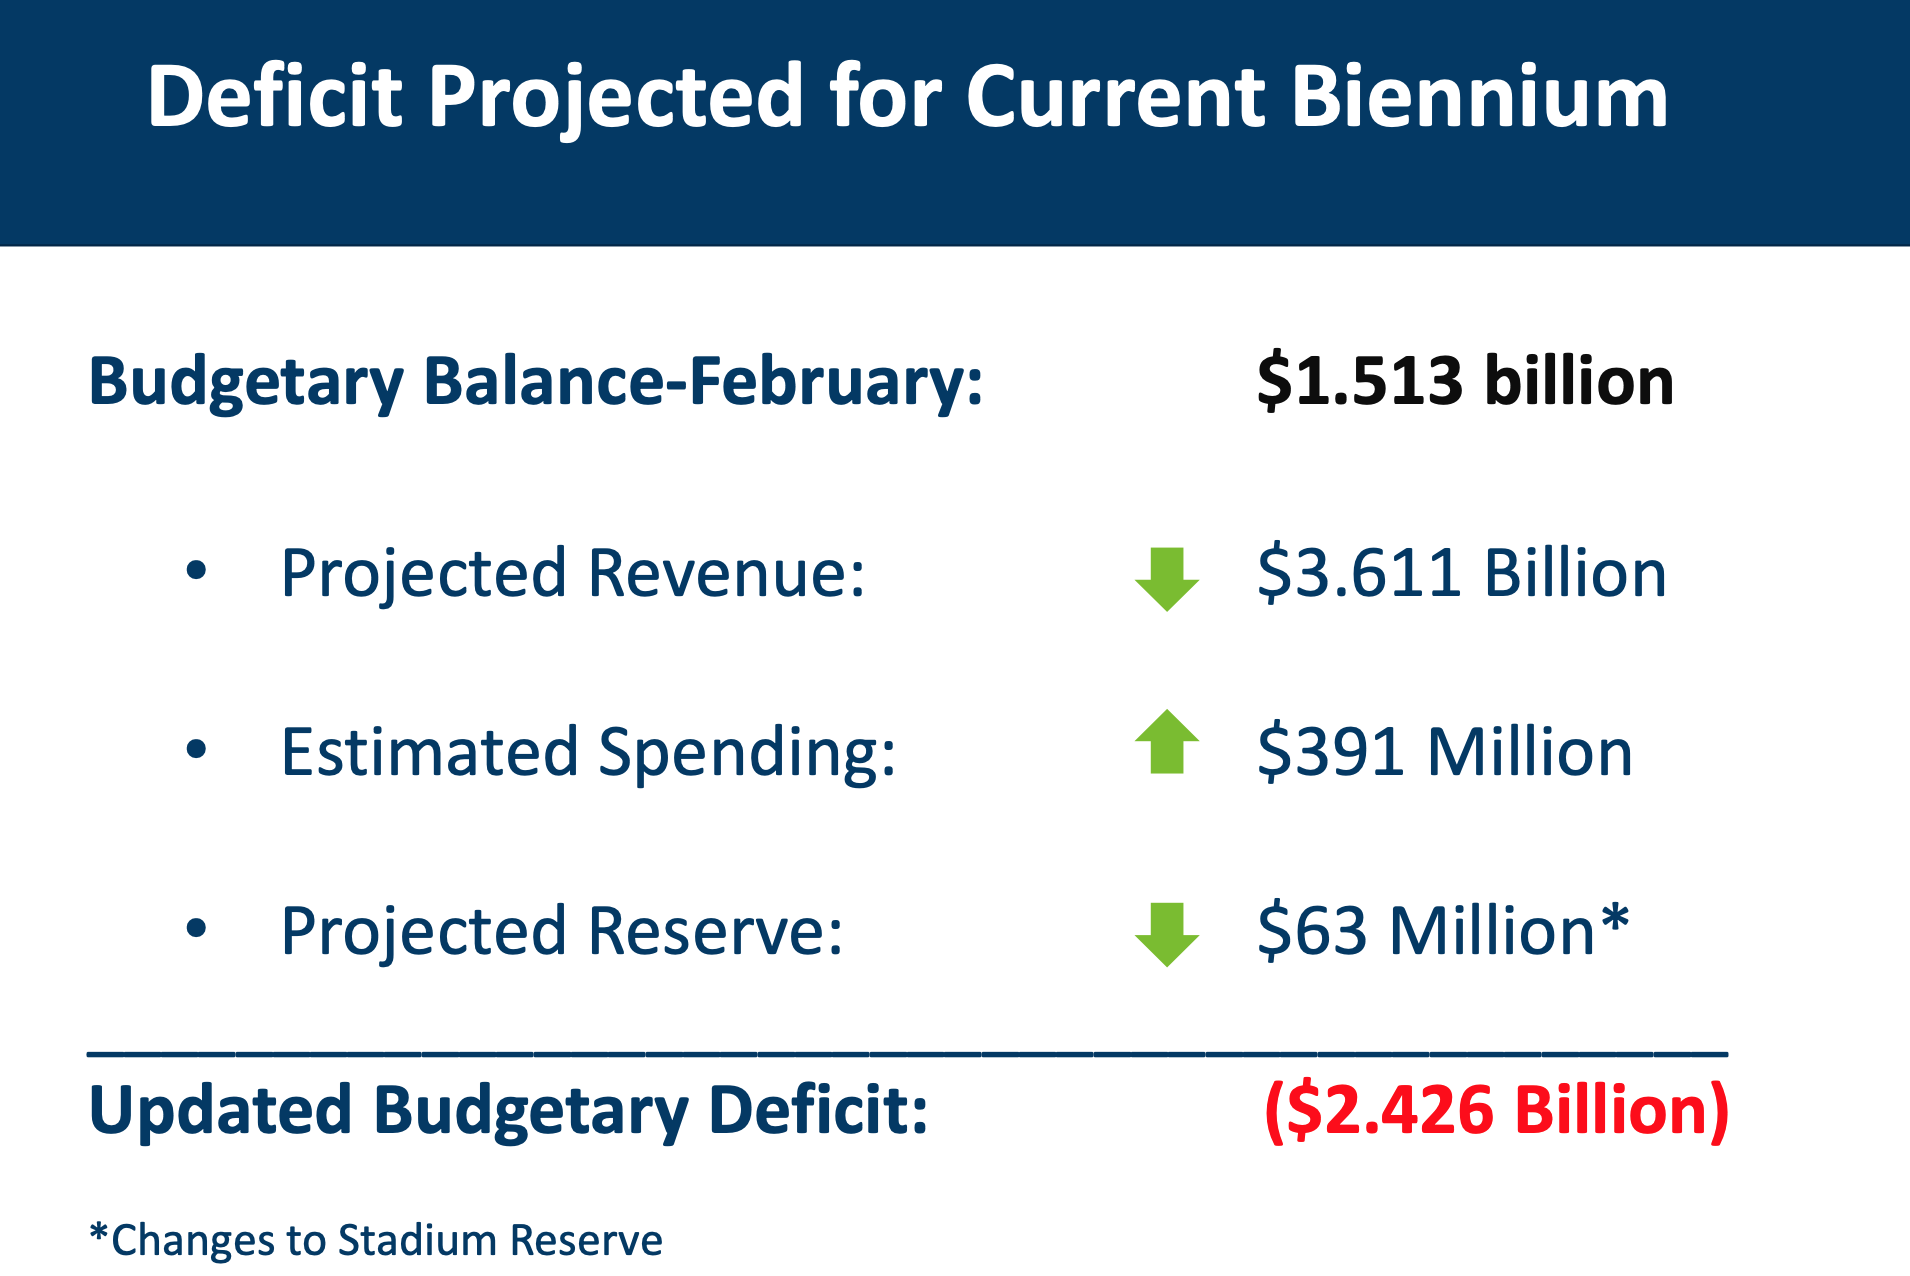 The office of Management and Budget to summarize Minnesota's current financial situation.